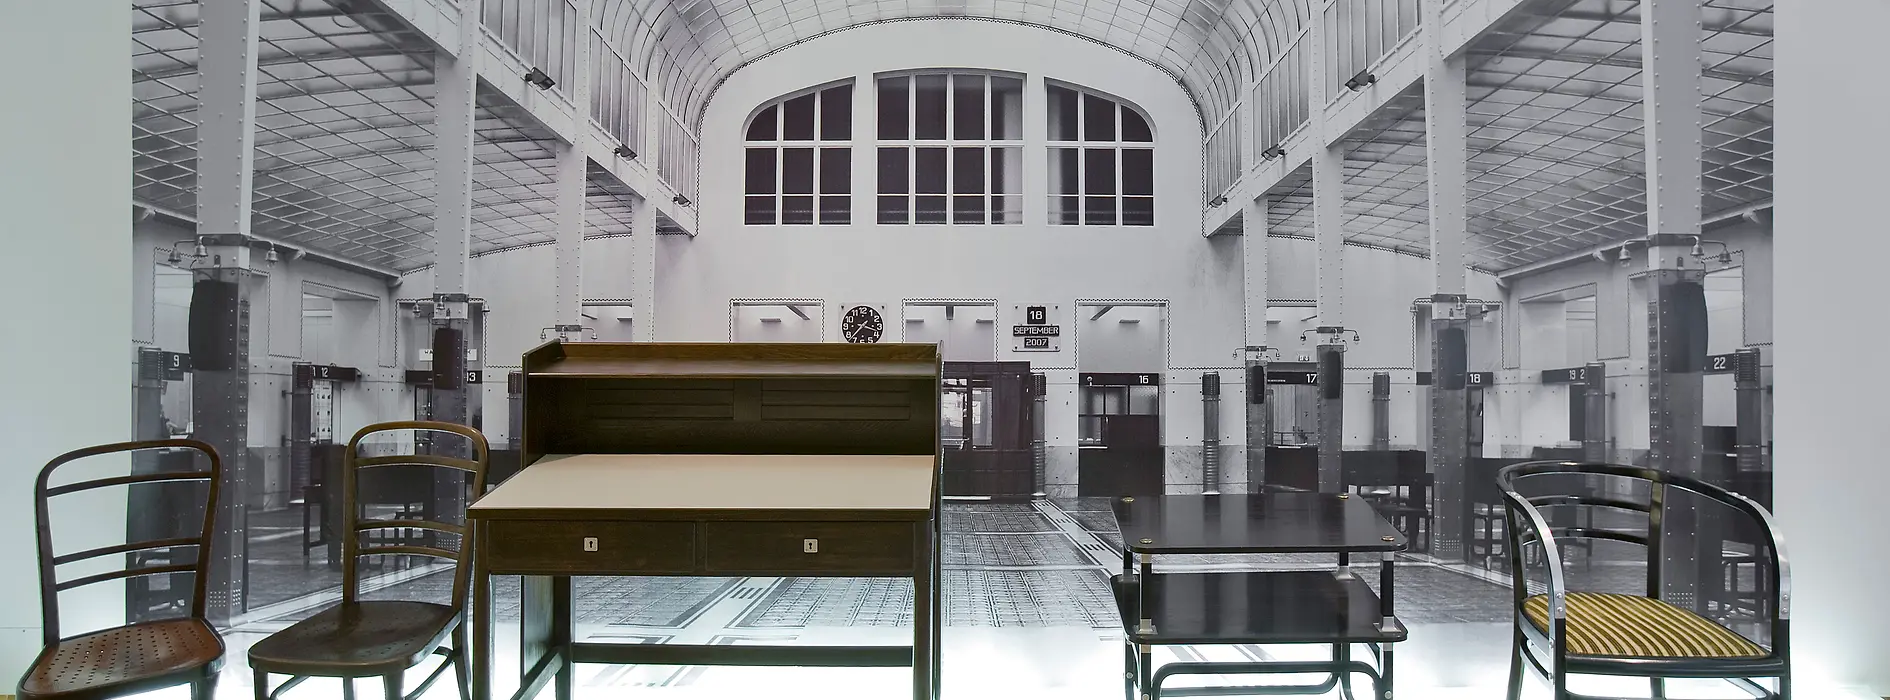 Furniture for the Vienna Post Savings Bank, designed by Otto Wagner, produced by the Thonet brothers, Vienna around 1904/06